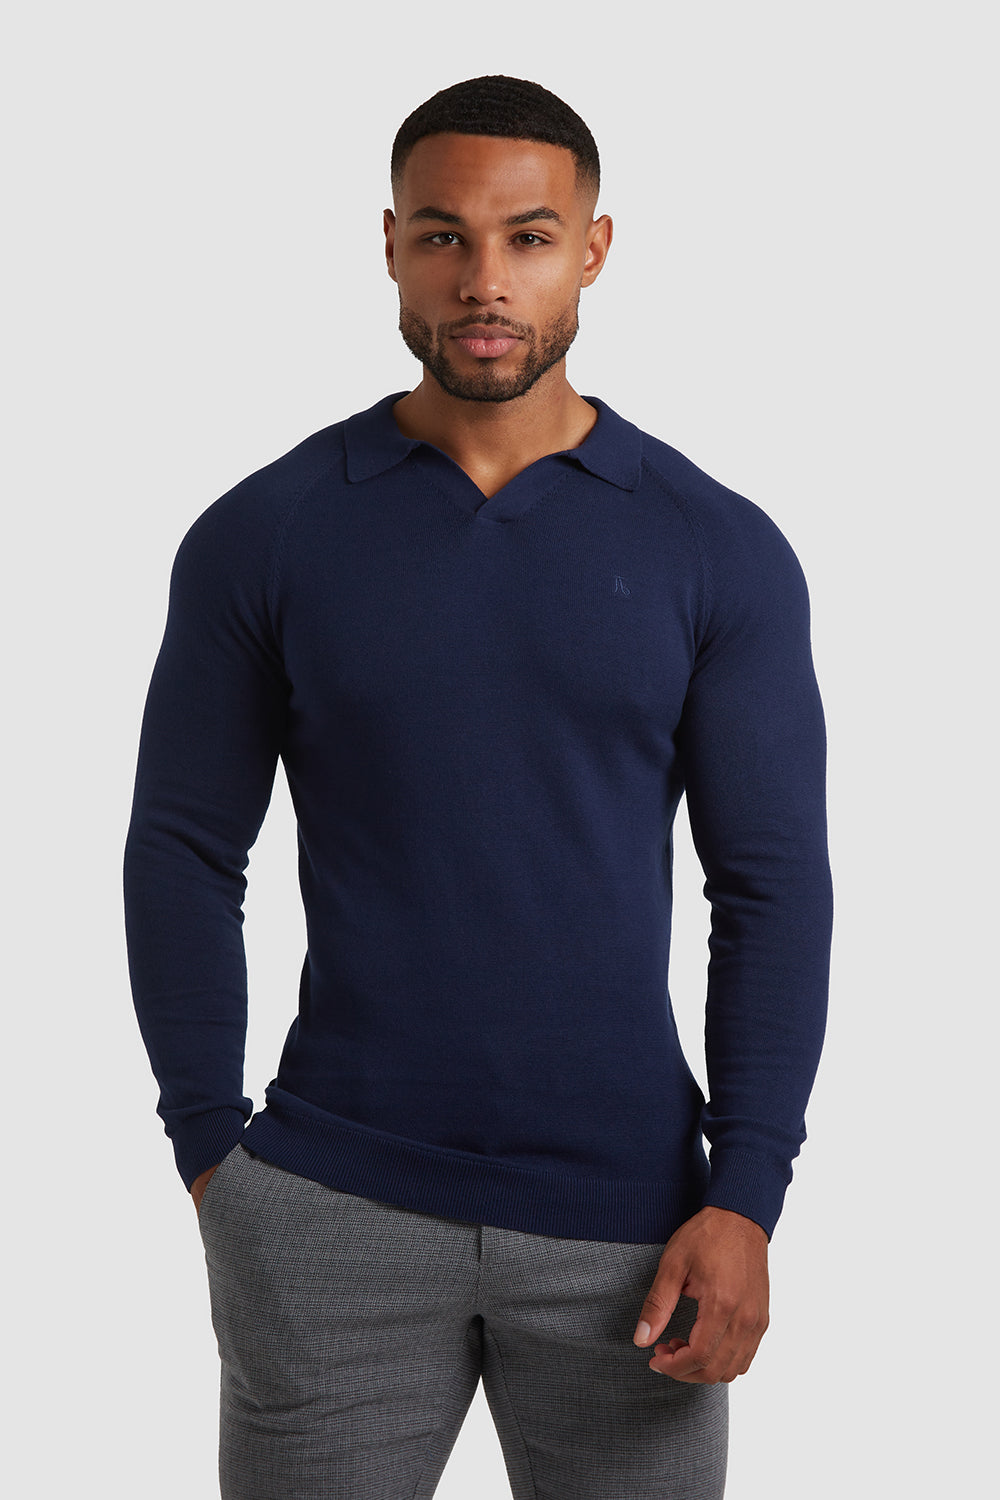 Buttonless Open Collar Polo Shirt (LS) in Navy - TAILORED ATHLETE - ROW